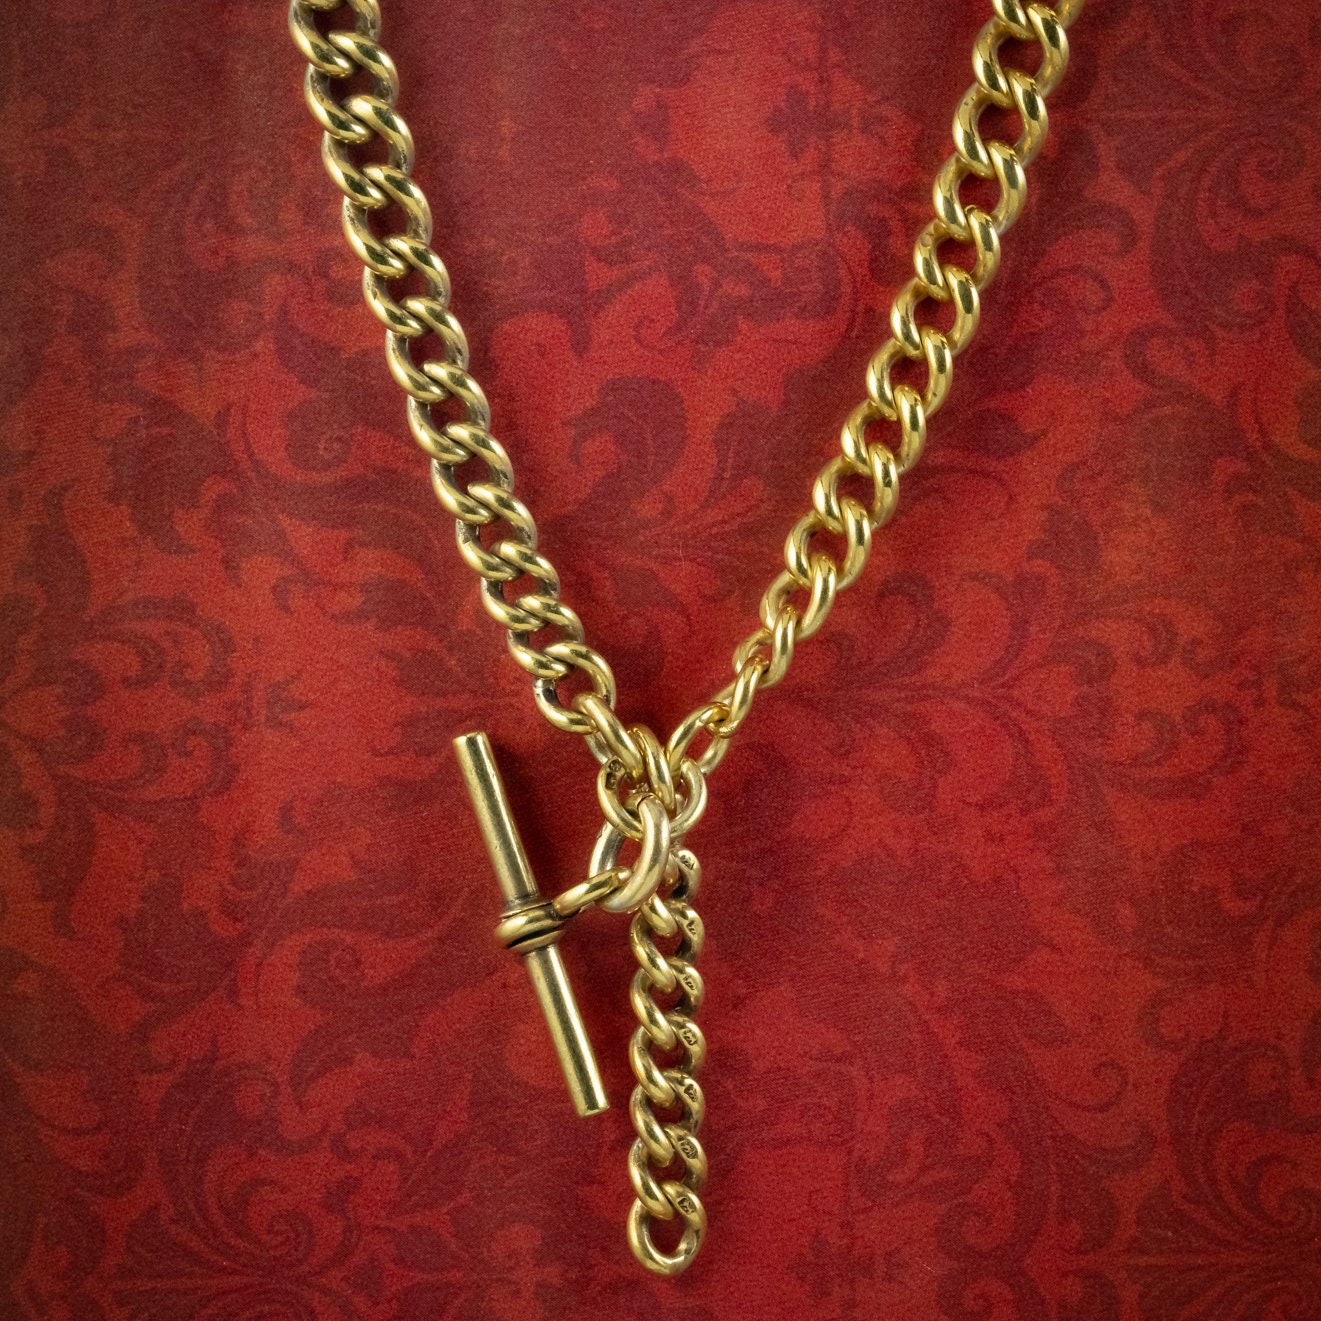 18k gold Antique Necklace - Albert chain - solid yellow gold